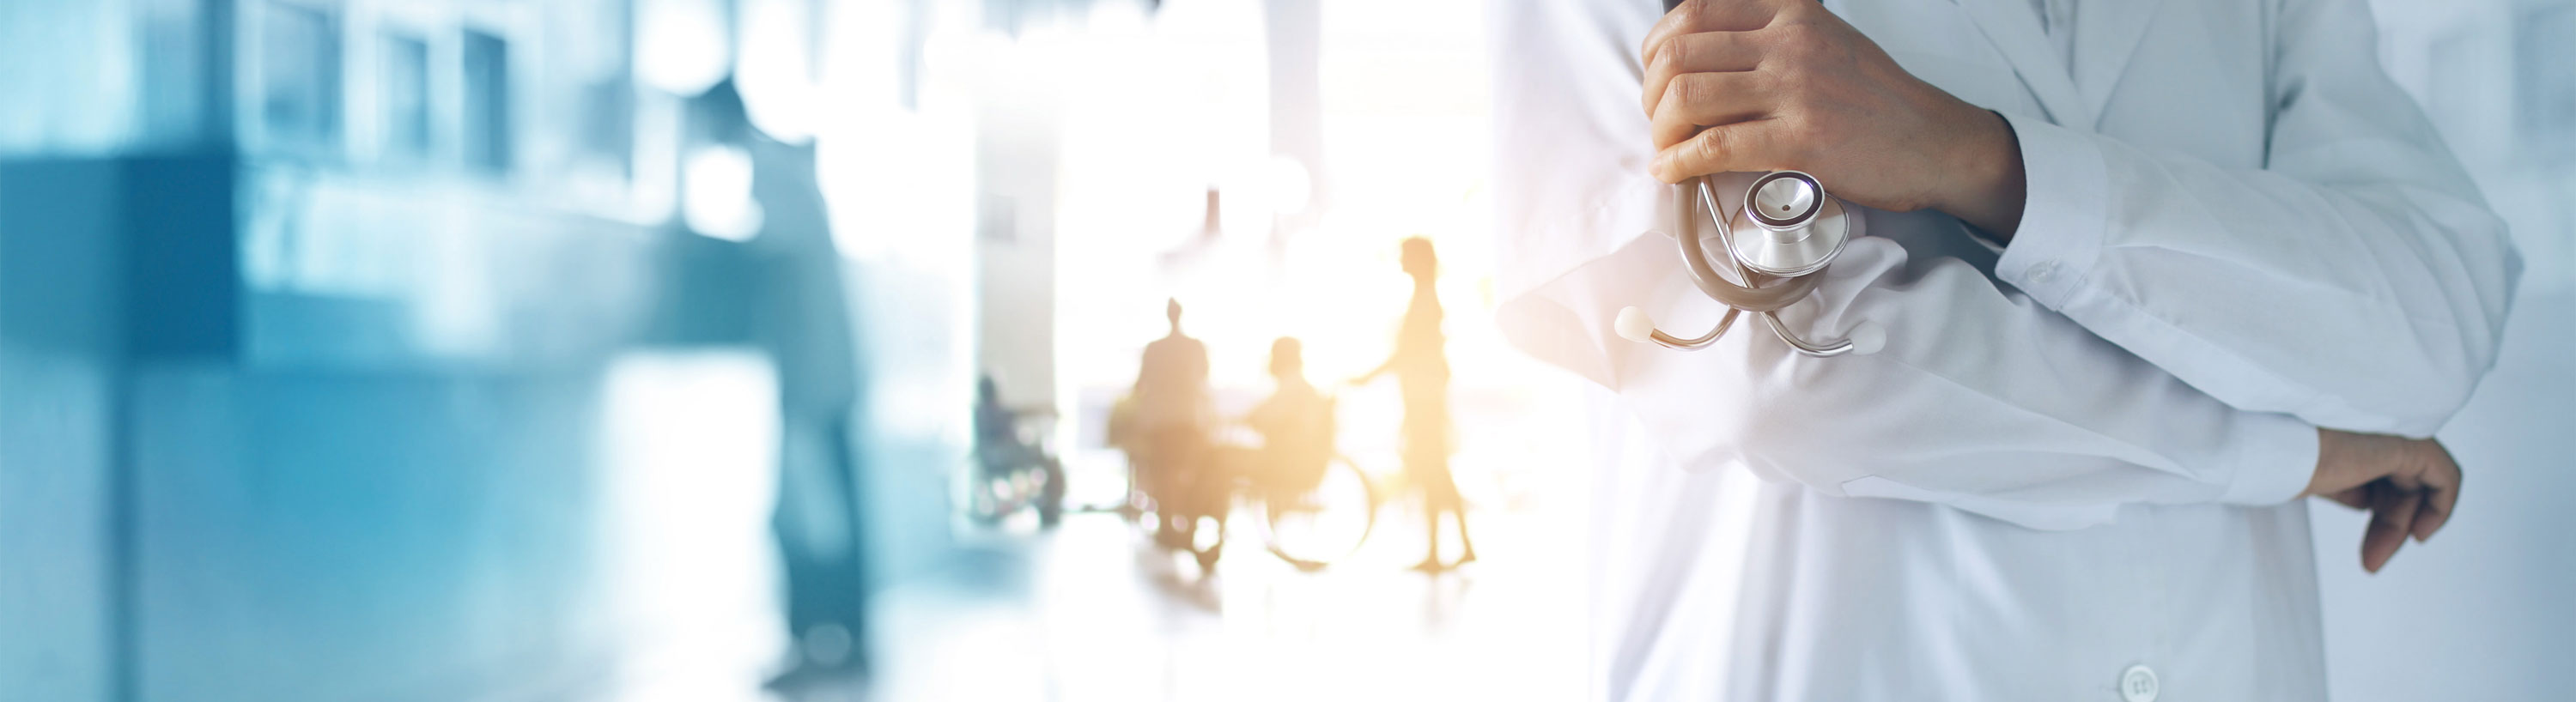 Banner Picture background of a Hospital Lobby. There is patients in  wheel chairs, nurses standing next to them, a man standing at a lobby desk, and close up of a male Physician (neck down) holding a stethoscope